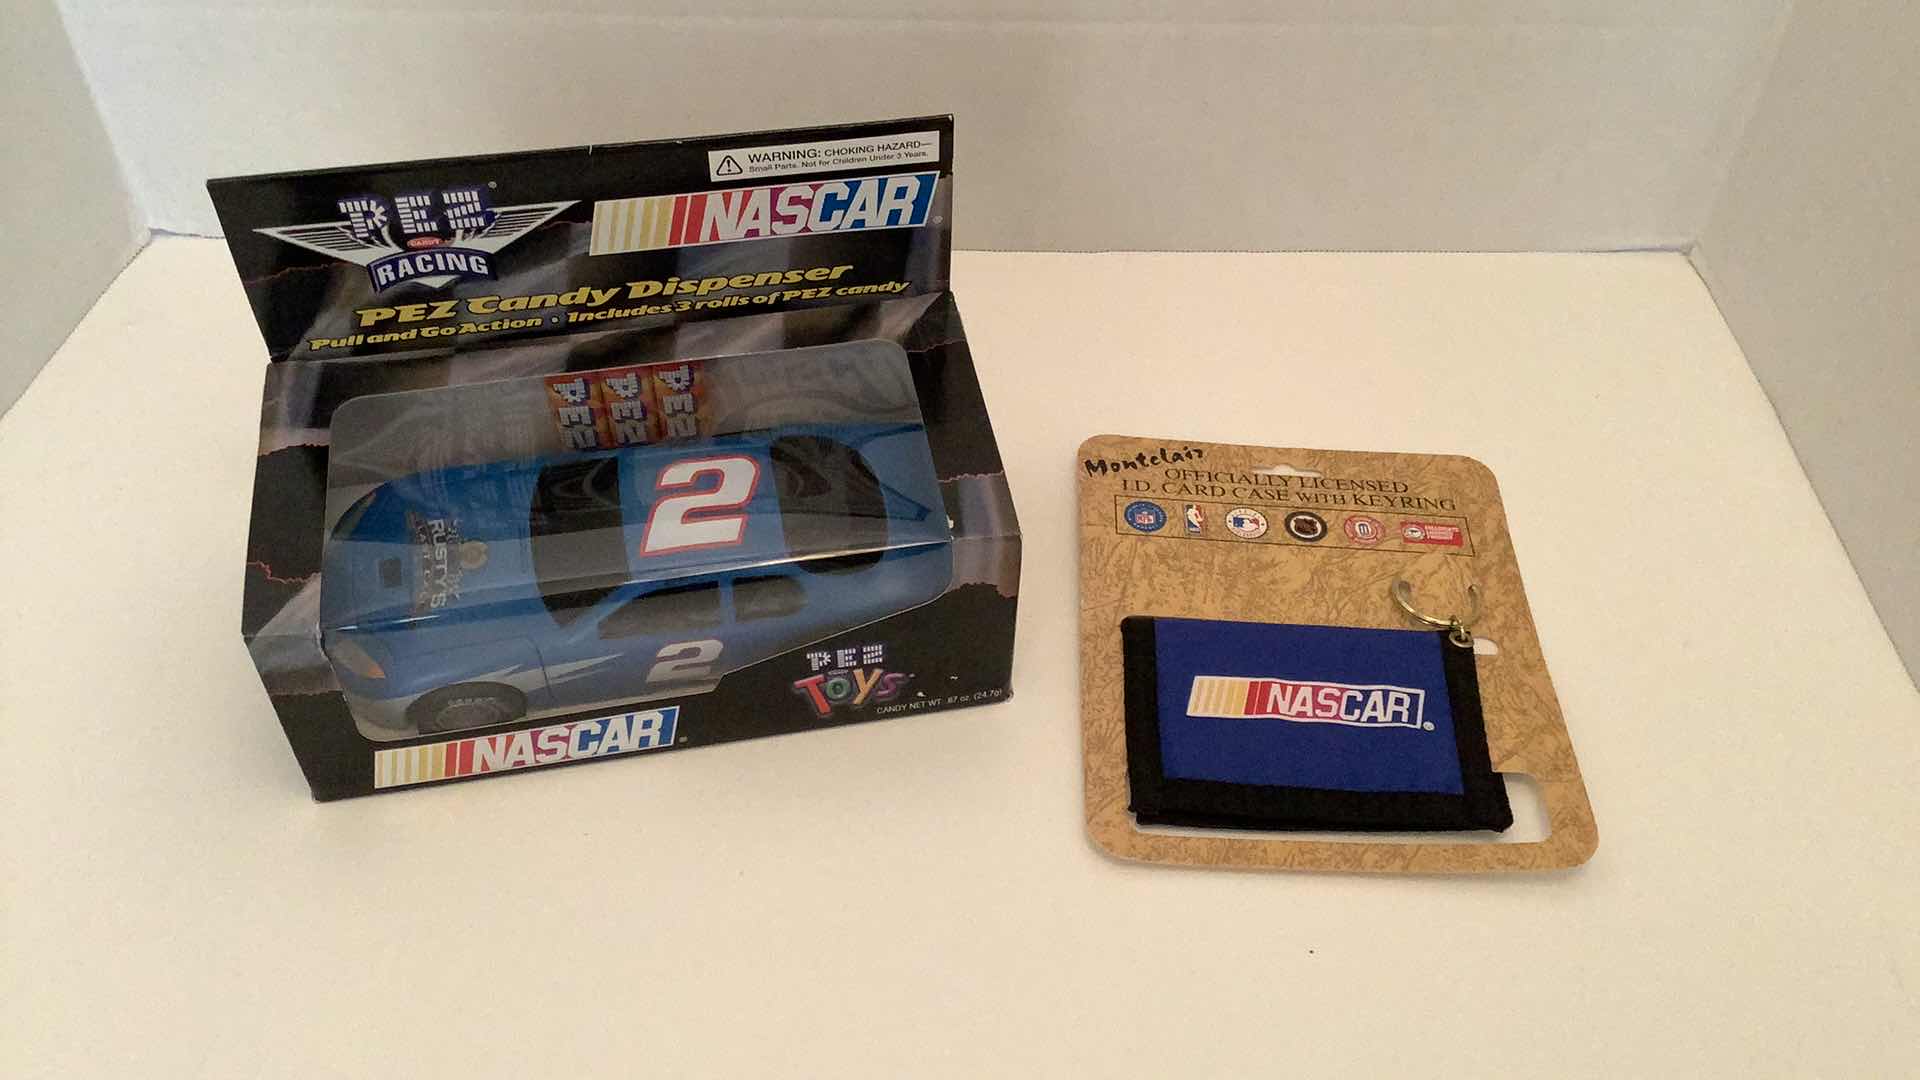 Photo 1 of NASCAR #2 PEZ CANDY DISPENSER AND CARD CASE